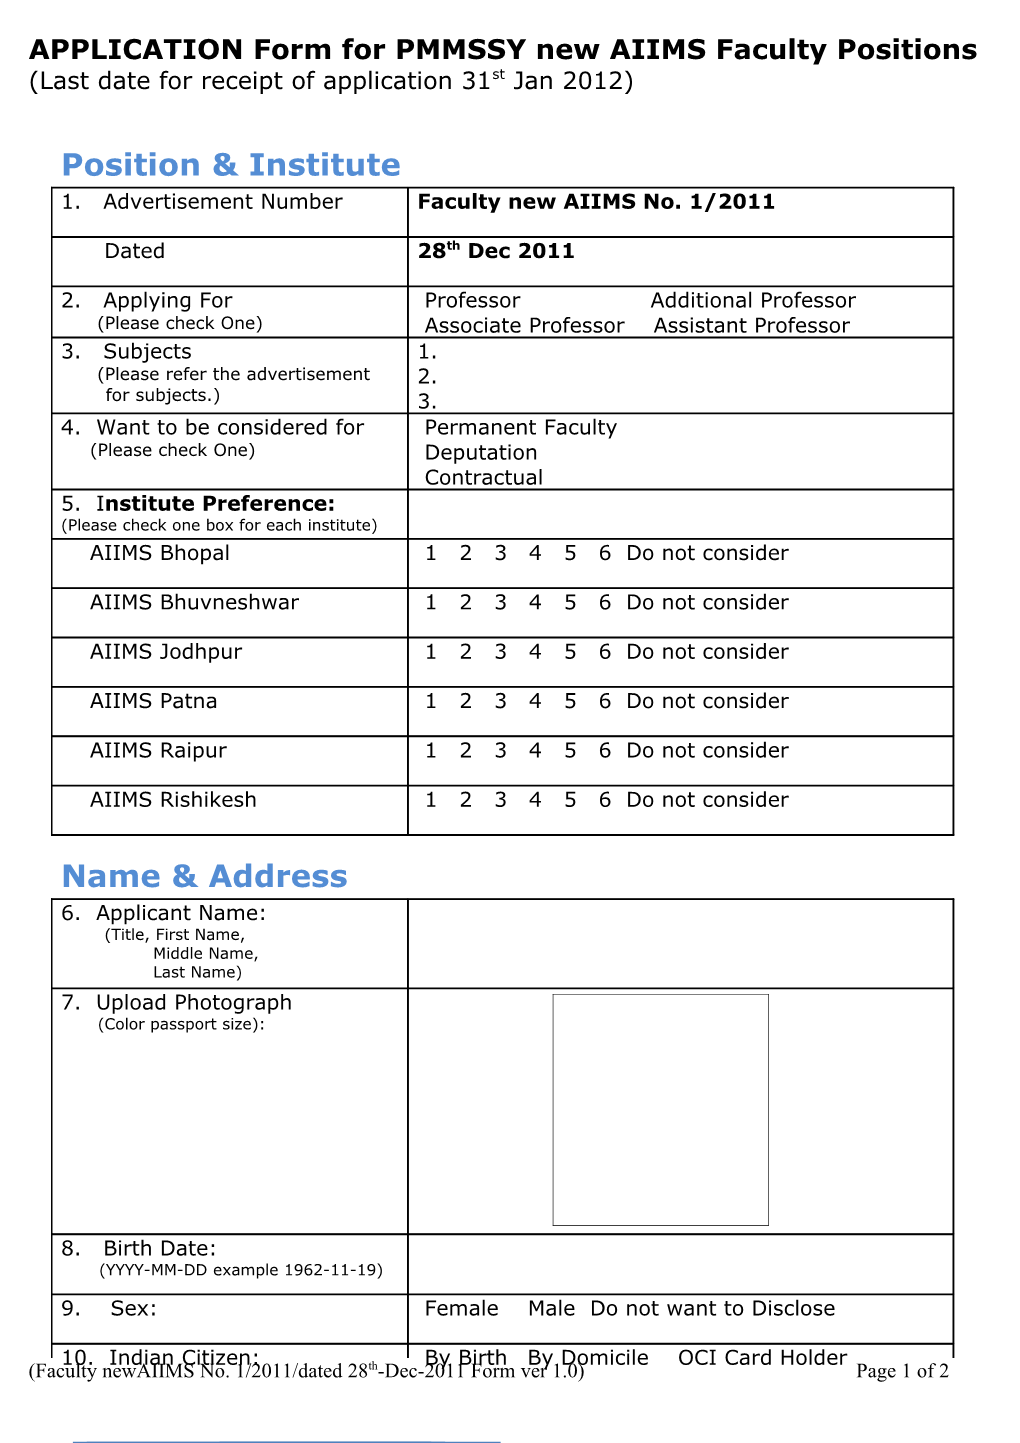 APPLICATION Form for PMMSSY New AIIMS Faculty Positions